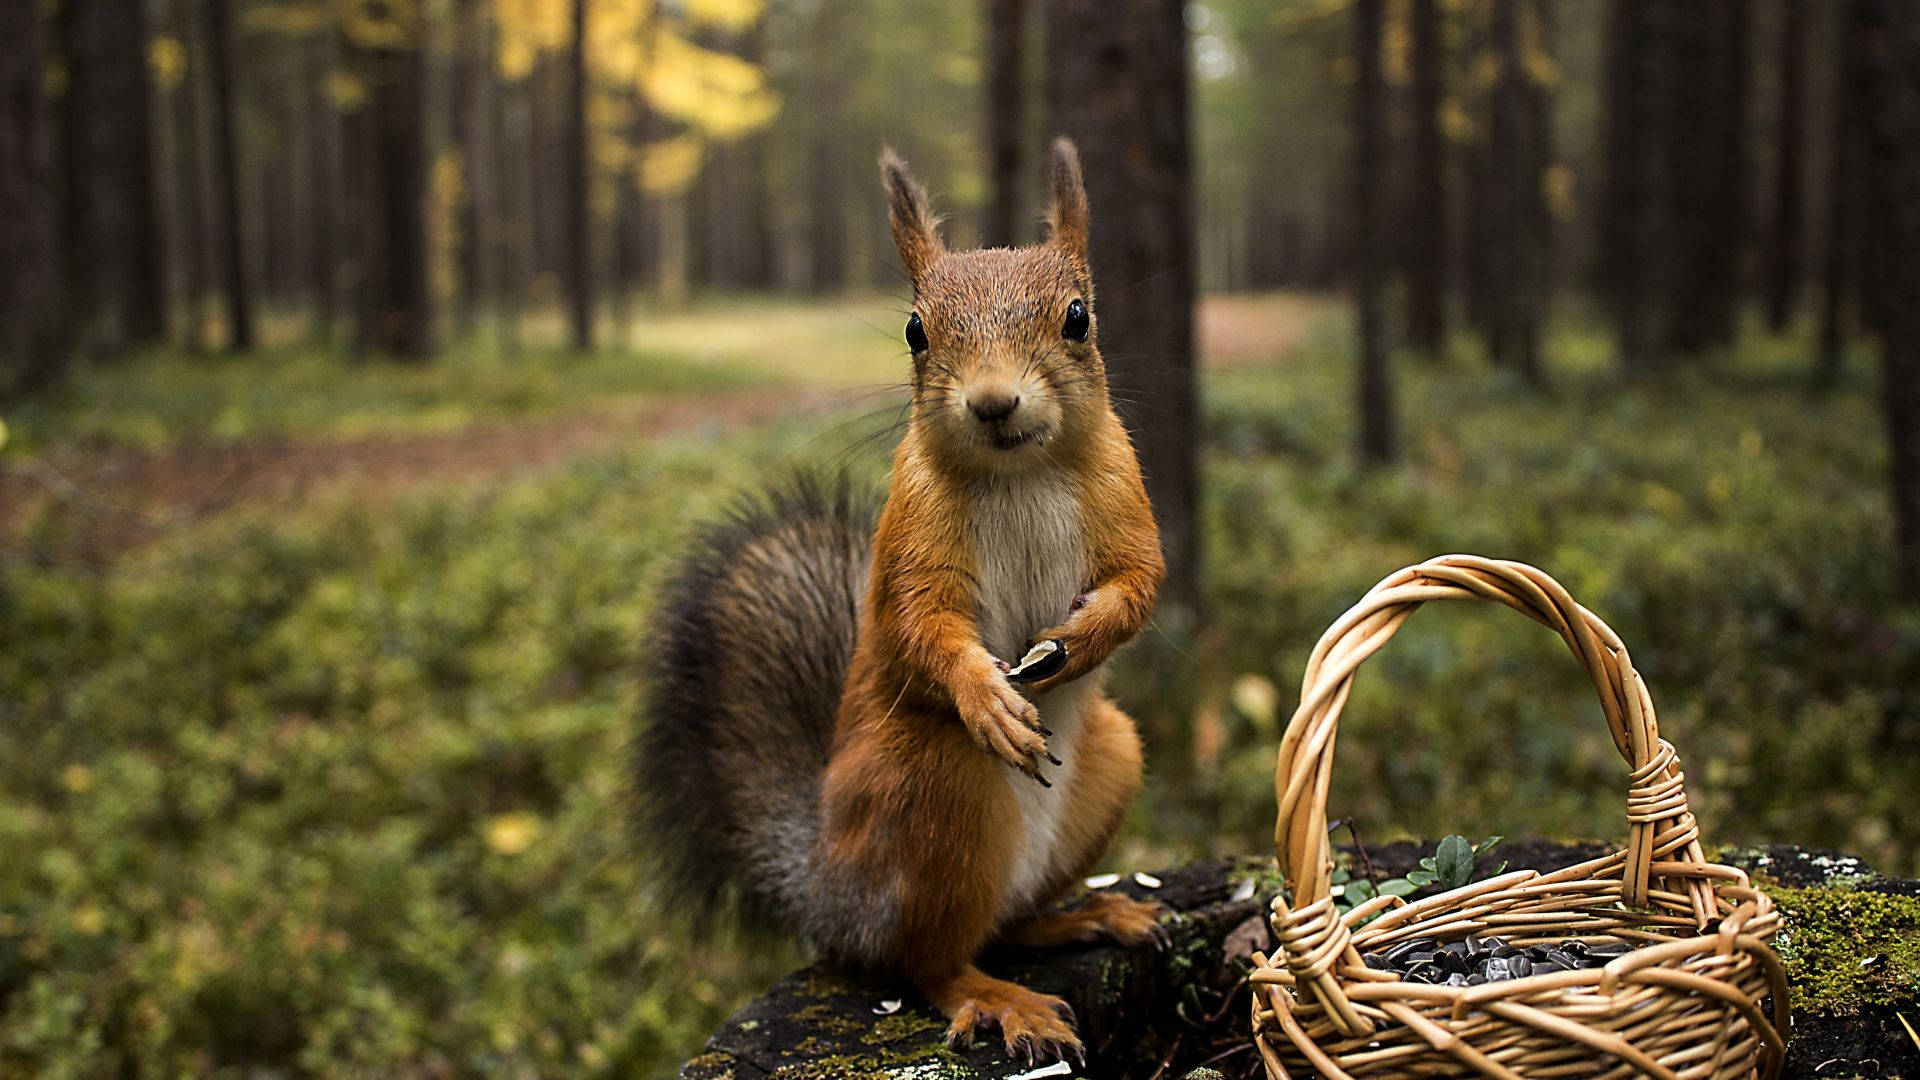 Squirrel And Basket Background